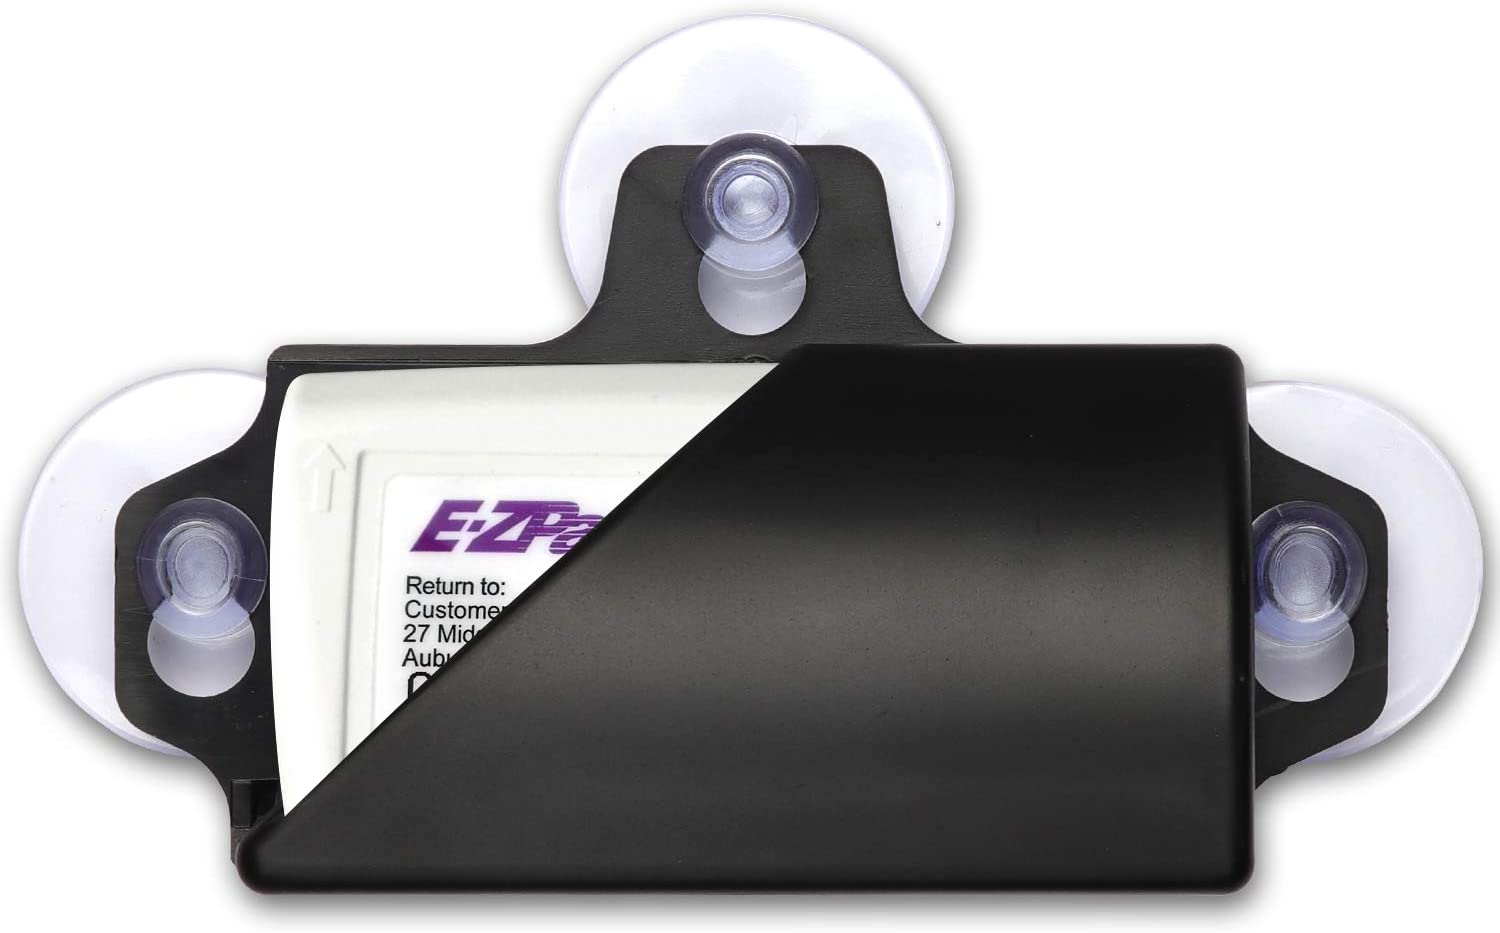 EZ Pass Toll Holder. Super Strong Holder with Suction Cups. Holds Tightly  to Your Car Windshield - Black, By NuBliss